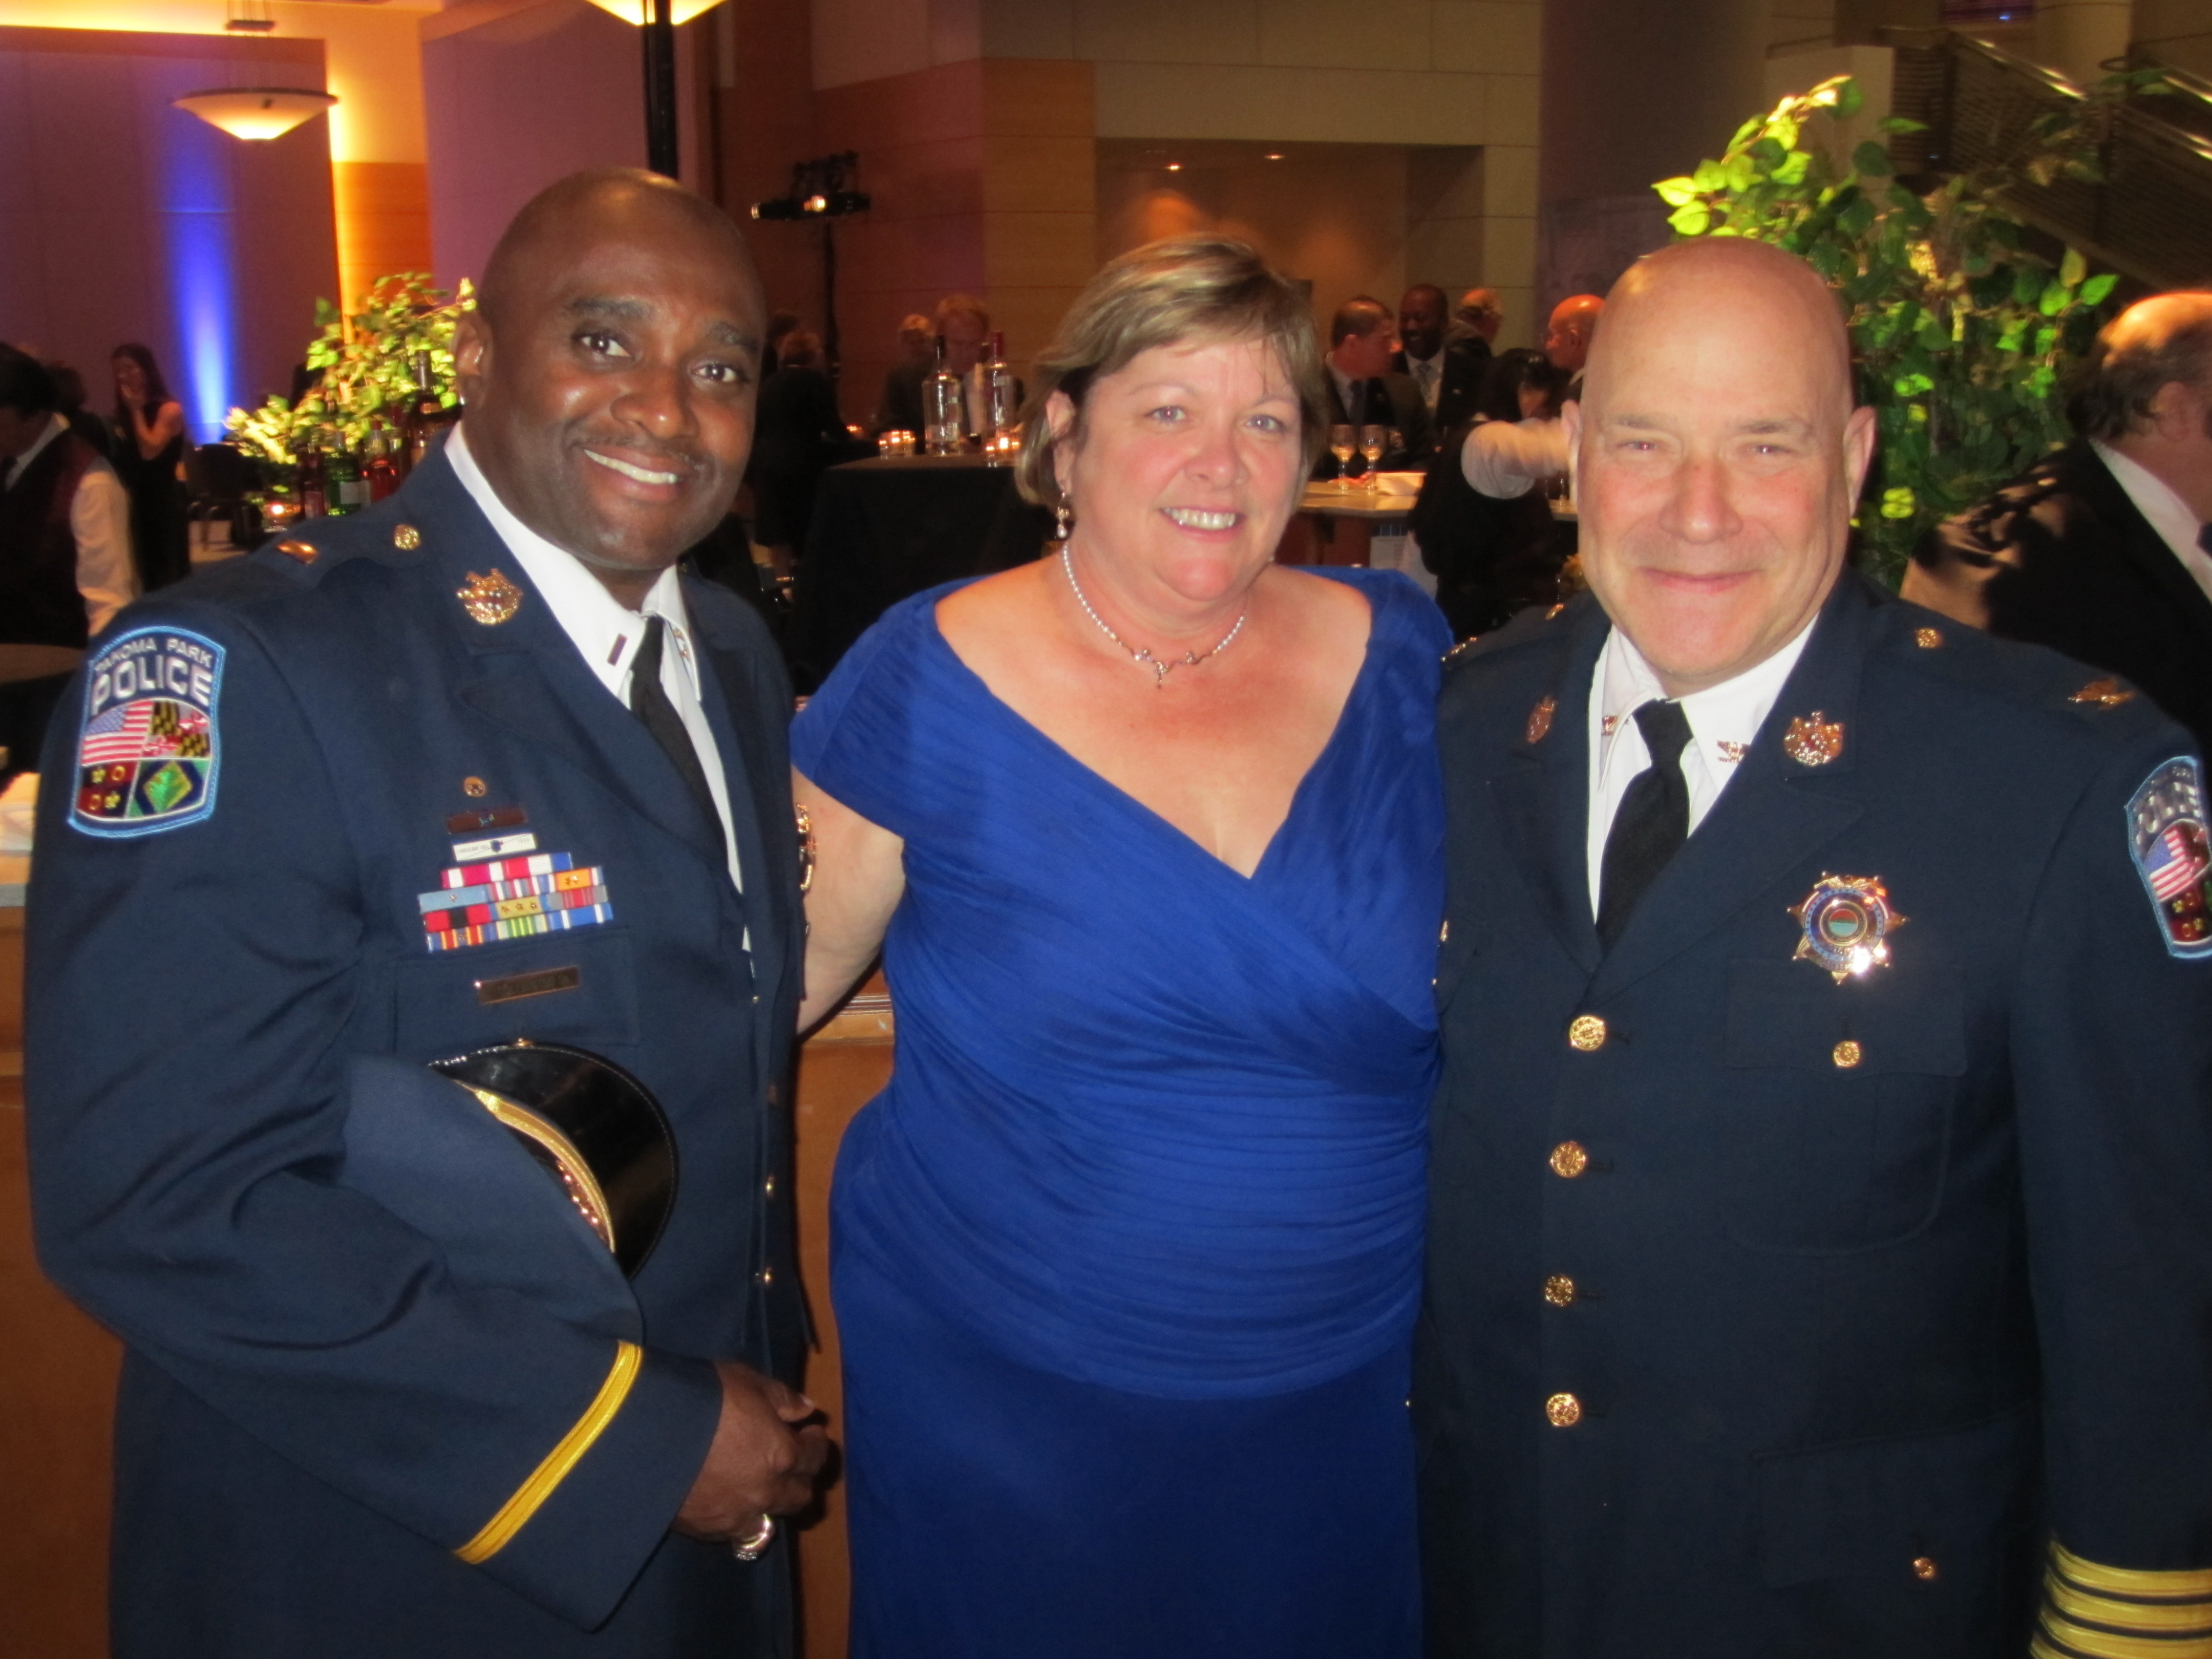 [Party Pix] Inside the 3rd annual National Law Enforcement Gala